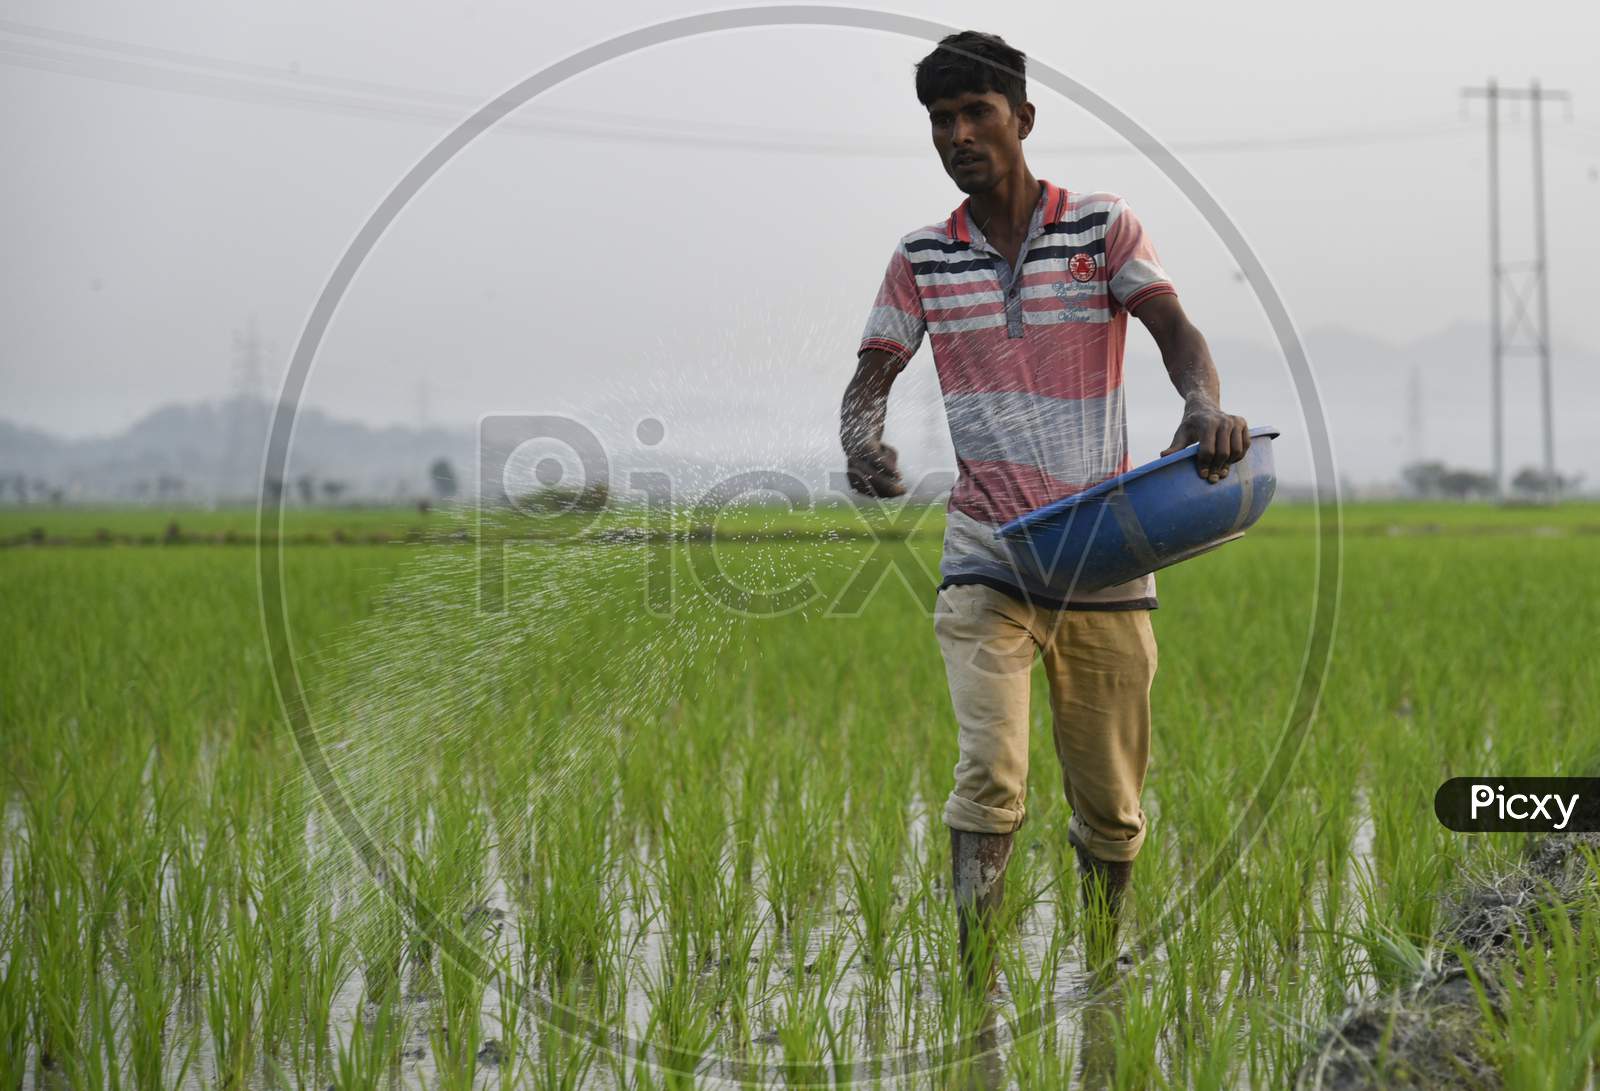 An Indian Farmer Scatters Fertilizer In His Newly Planted Paddy Field In The Morigaon District Of Assam, India